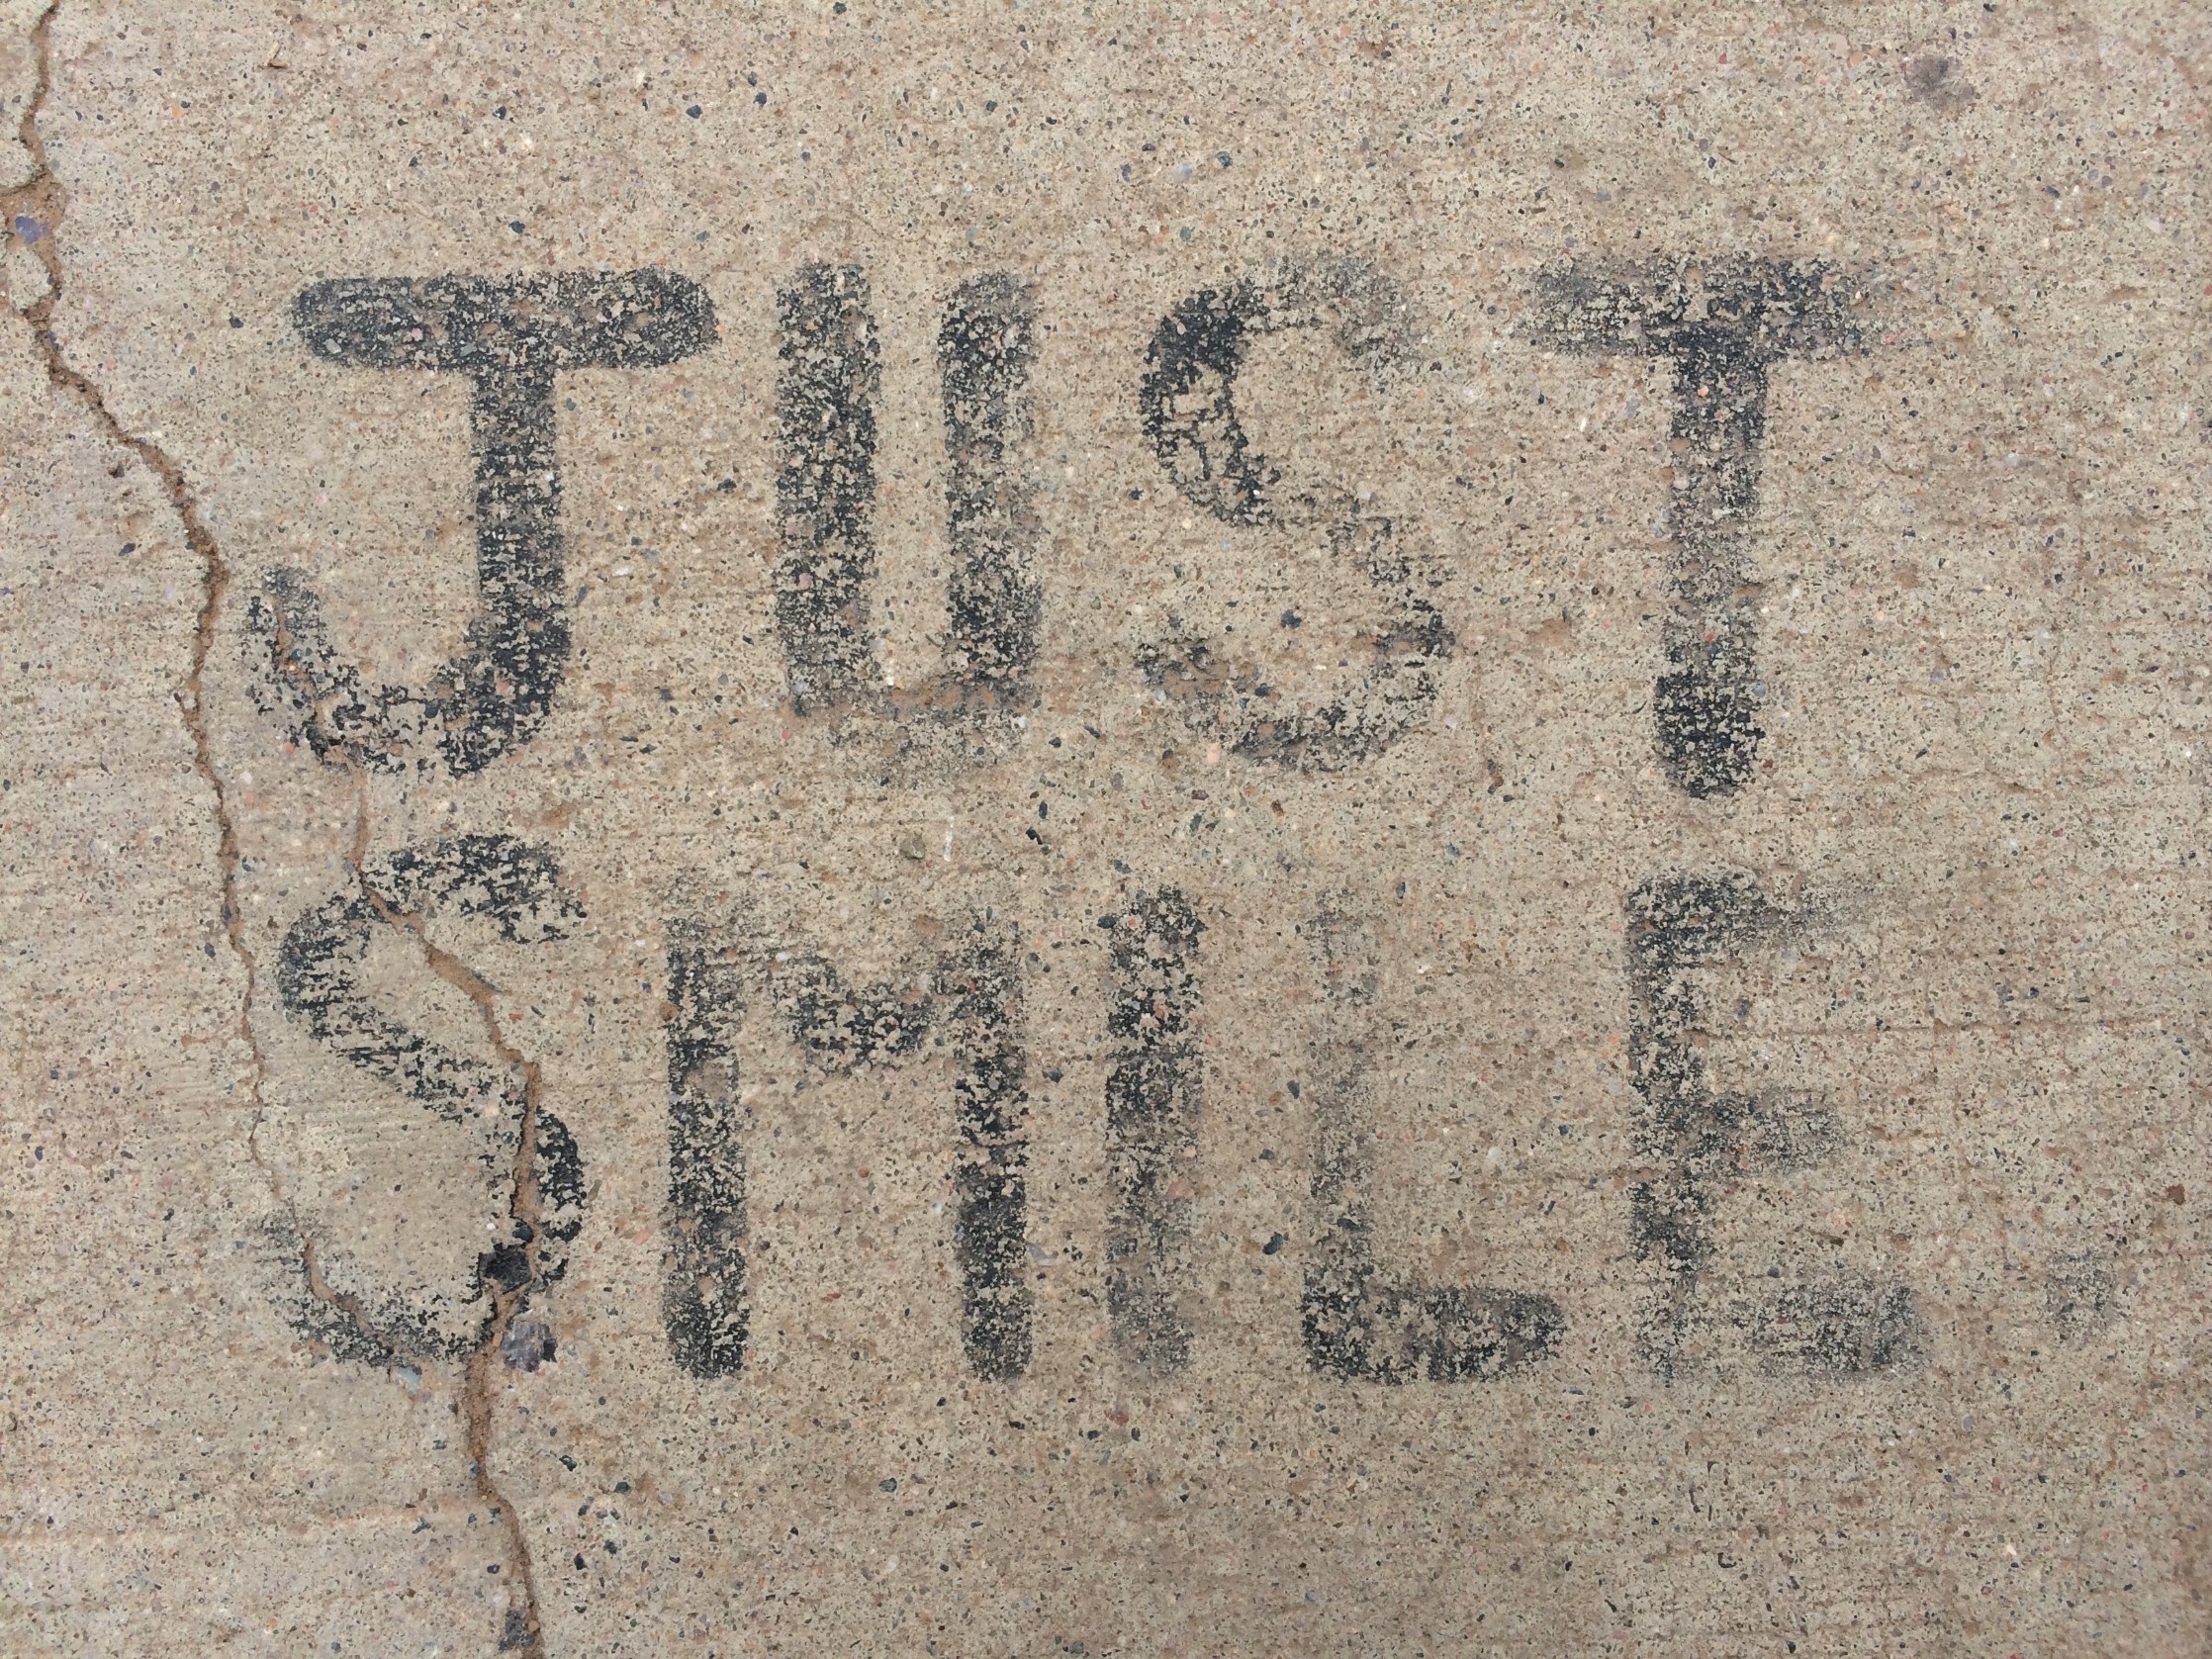 JUST SMILE sign telling about the best approach to life